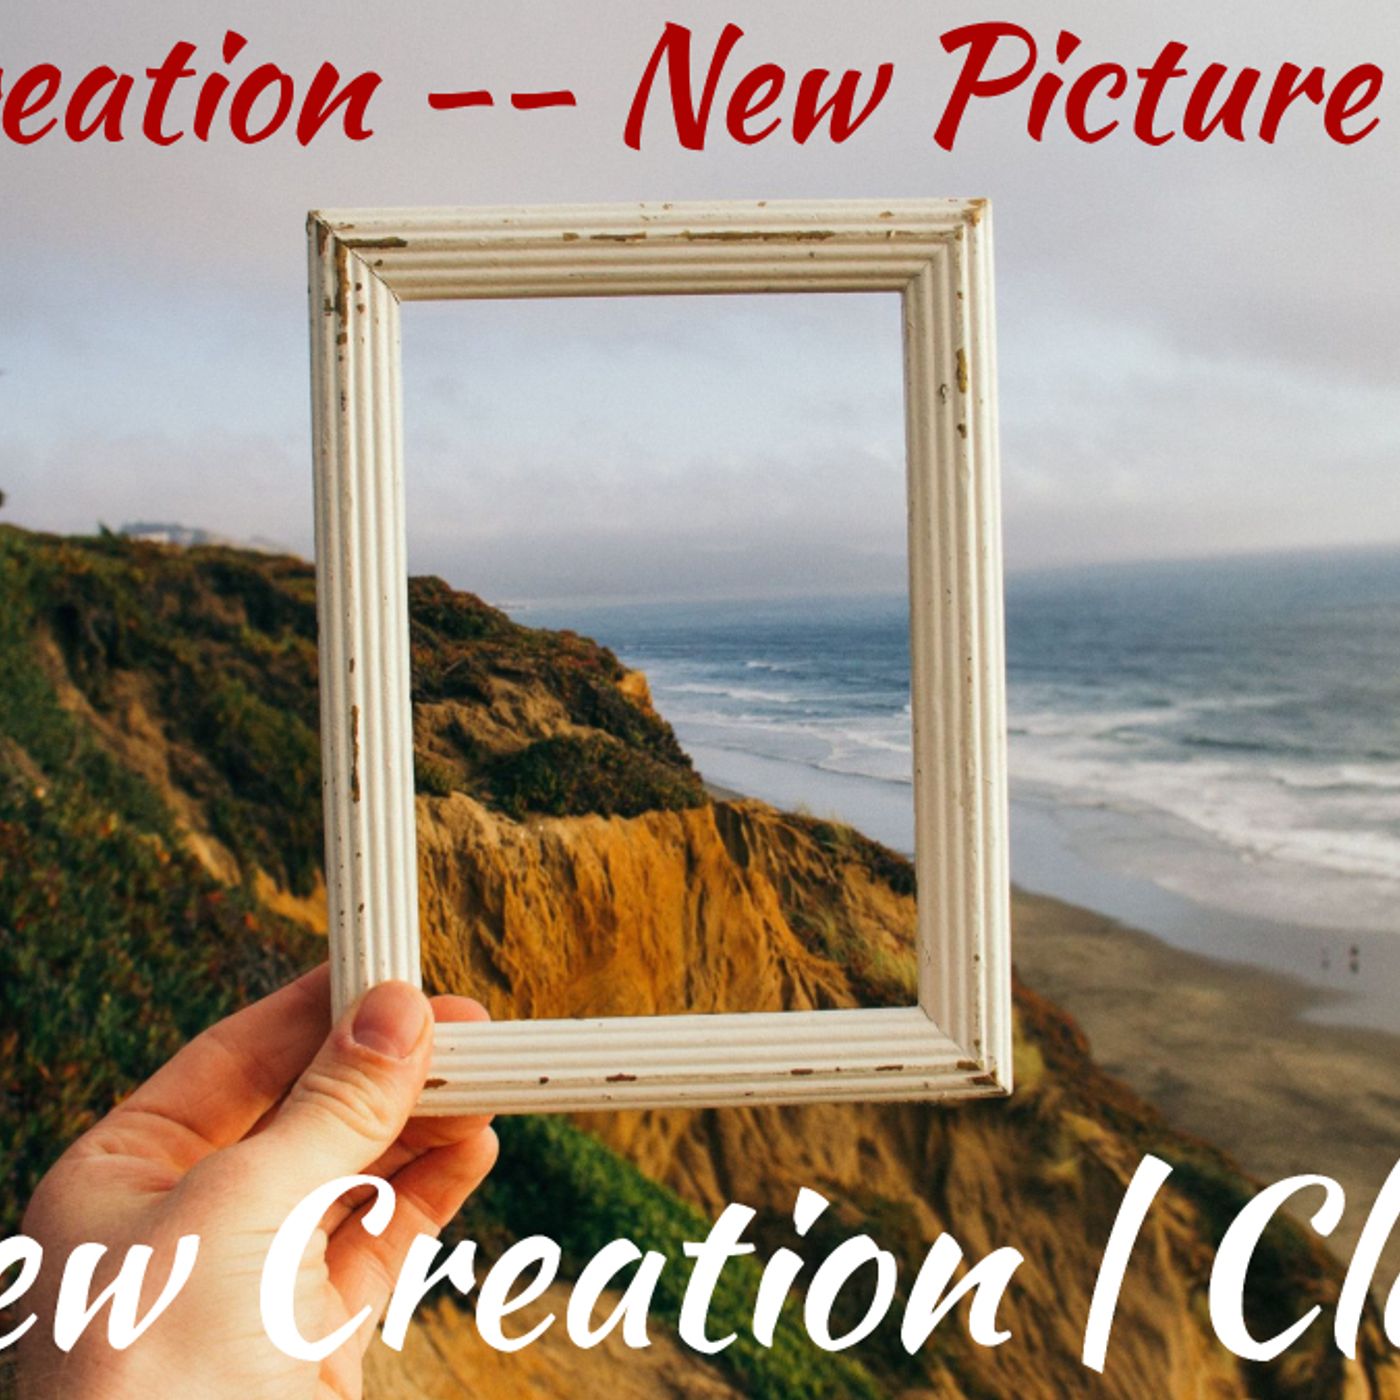 S2 Ep2188: A New Creation | Class 4 - 